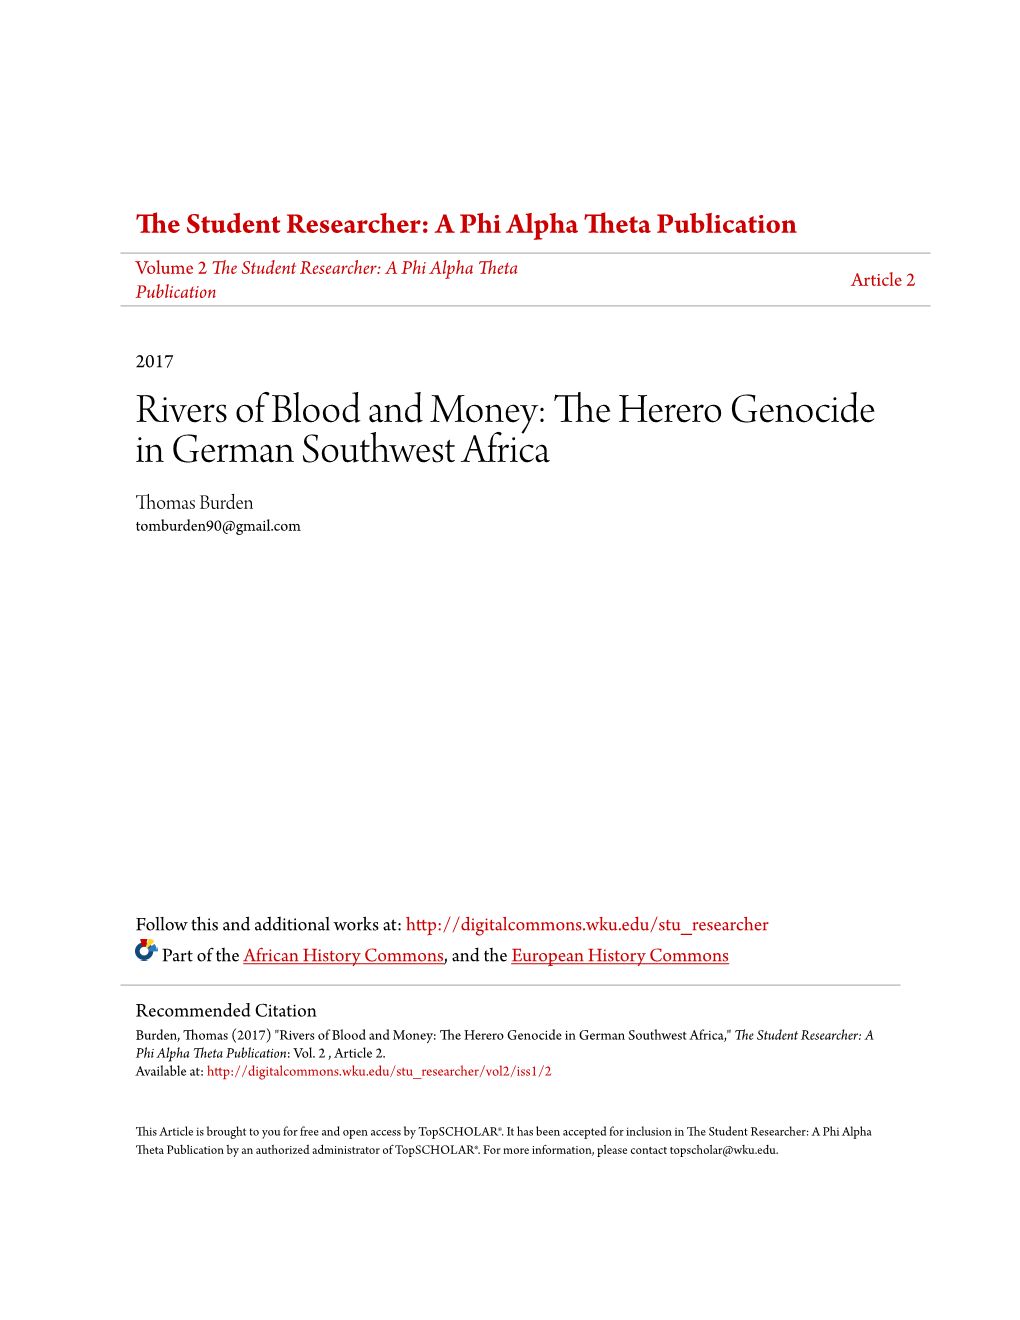 The Herero Genocide in German Southwest Africa